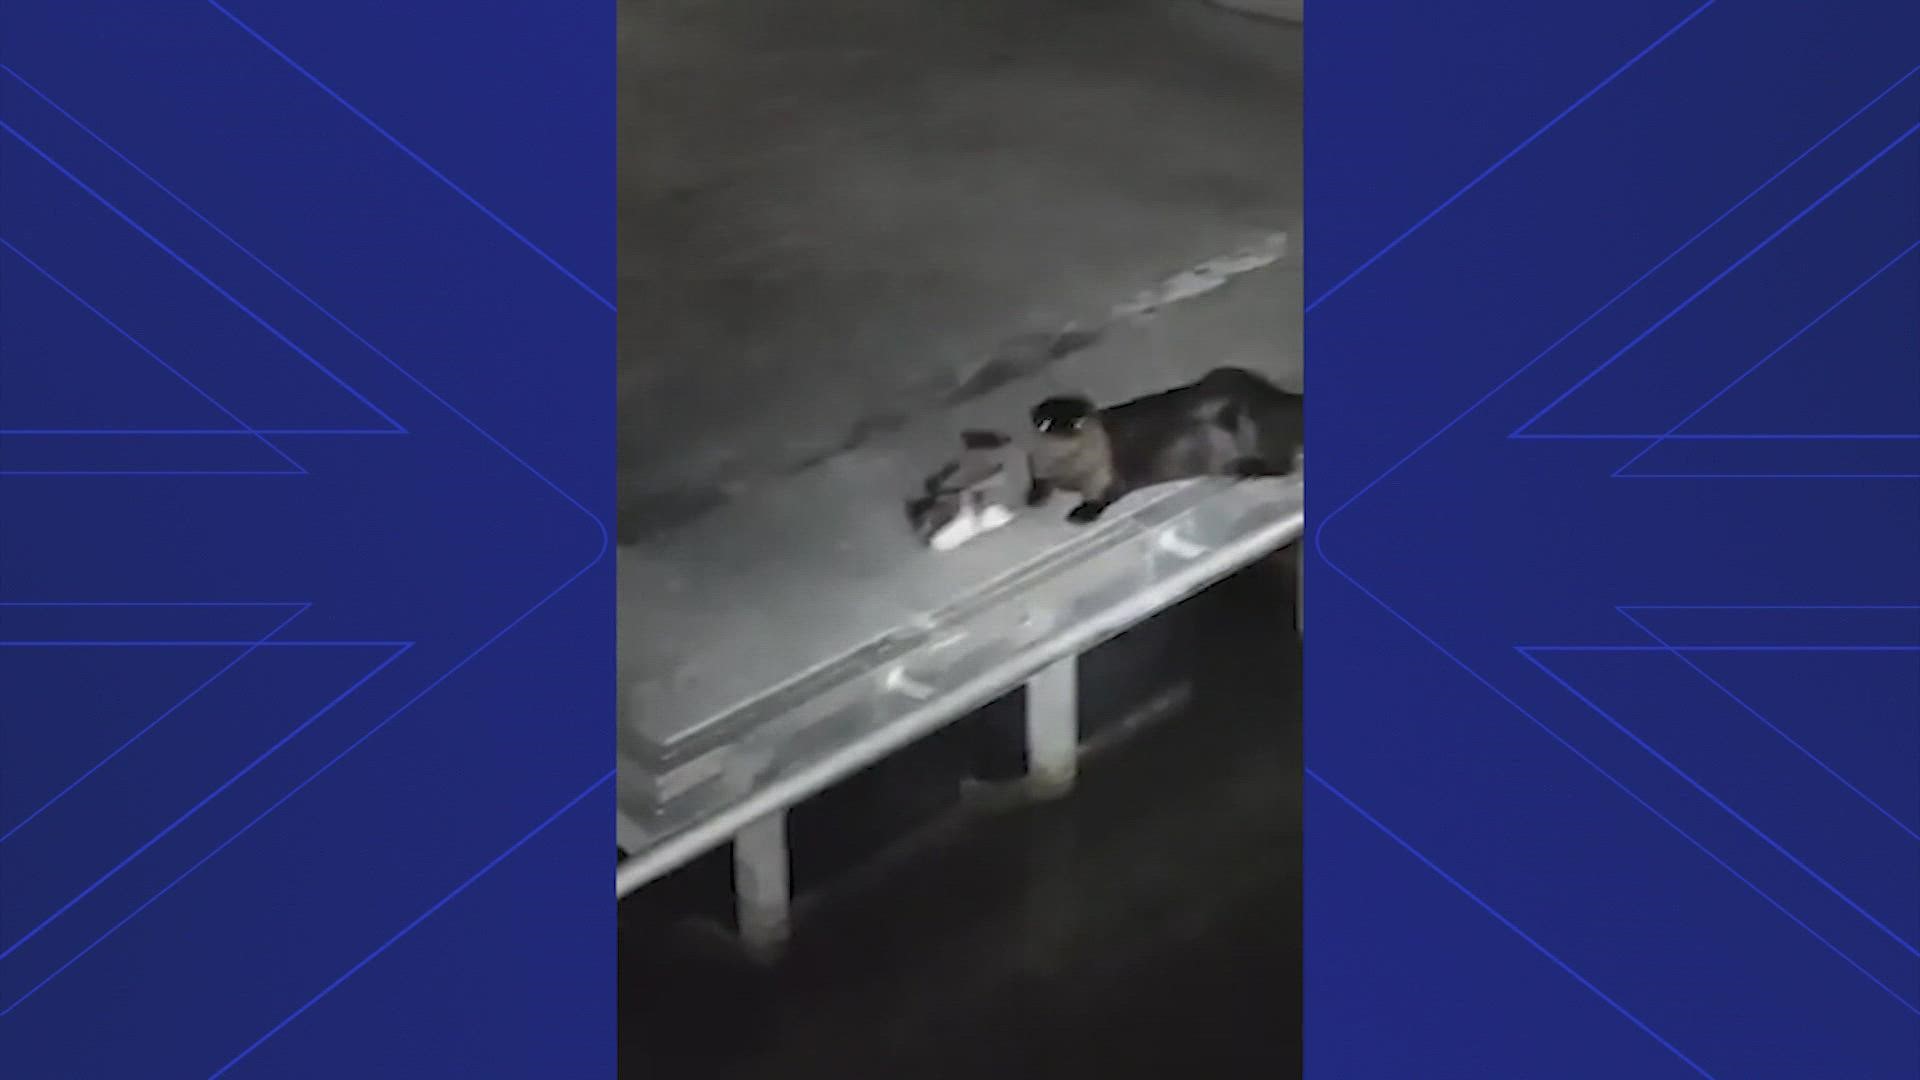 At first, they thought it was a big cat but then realized it was an otter snacking on a chunk of fish on the Baytown boat ramp.